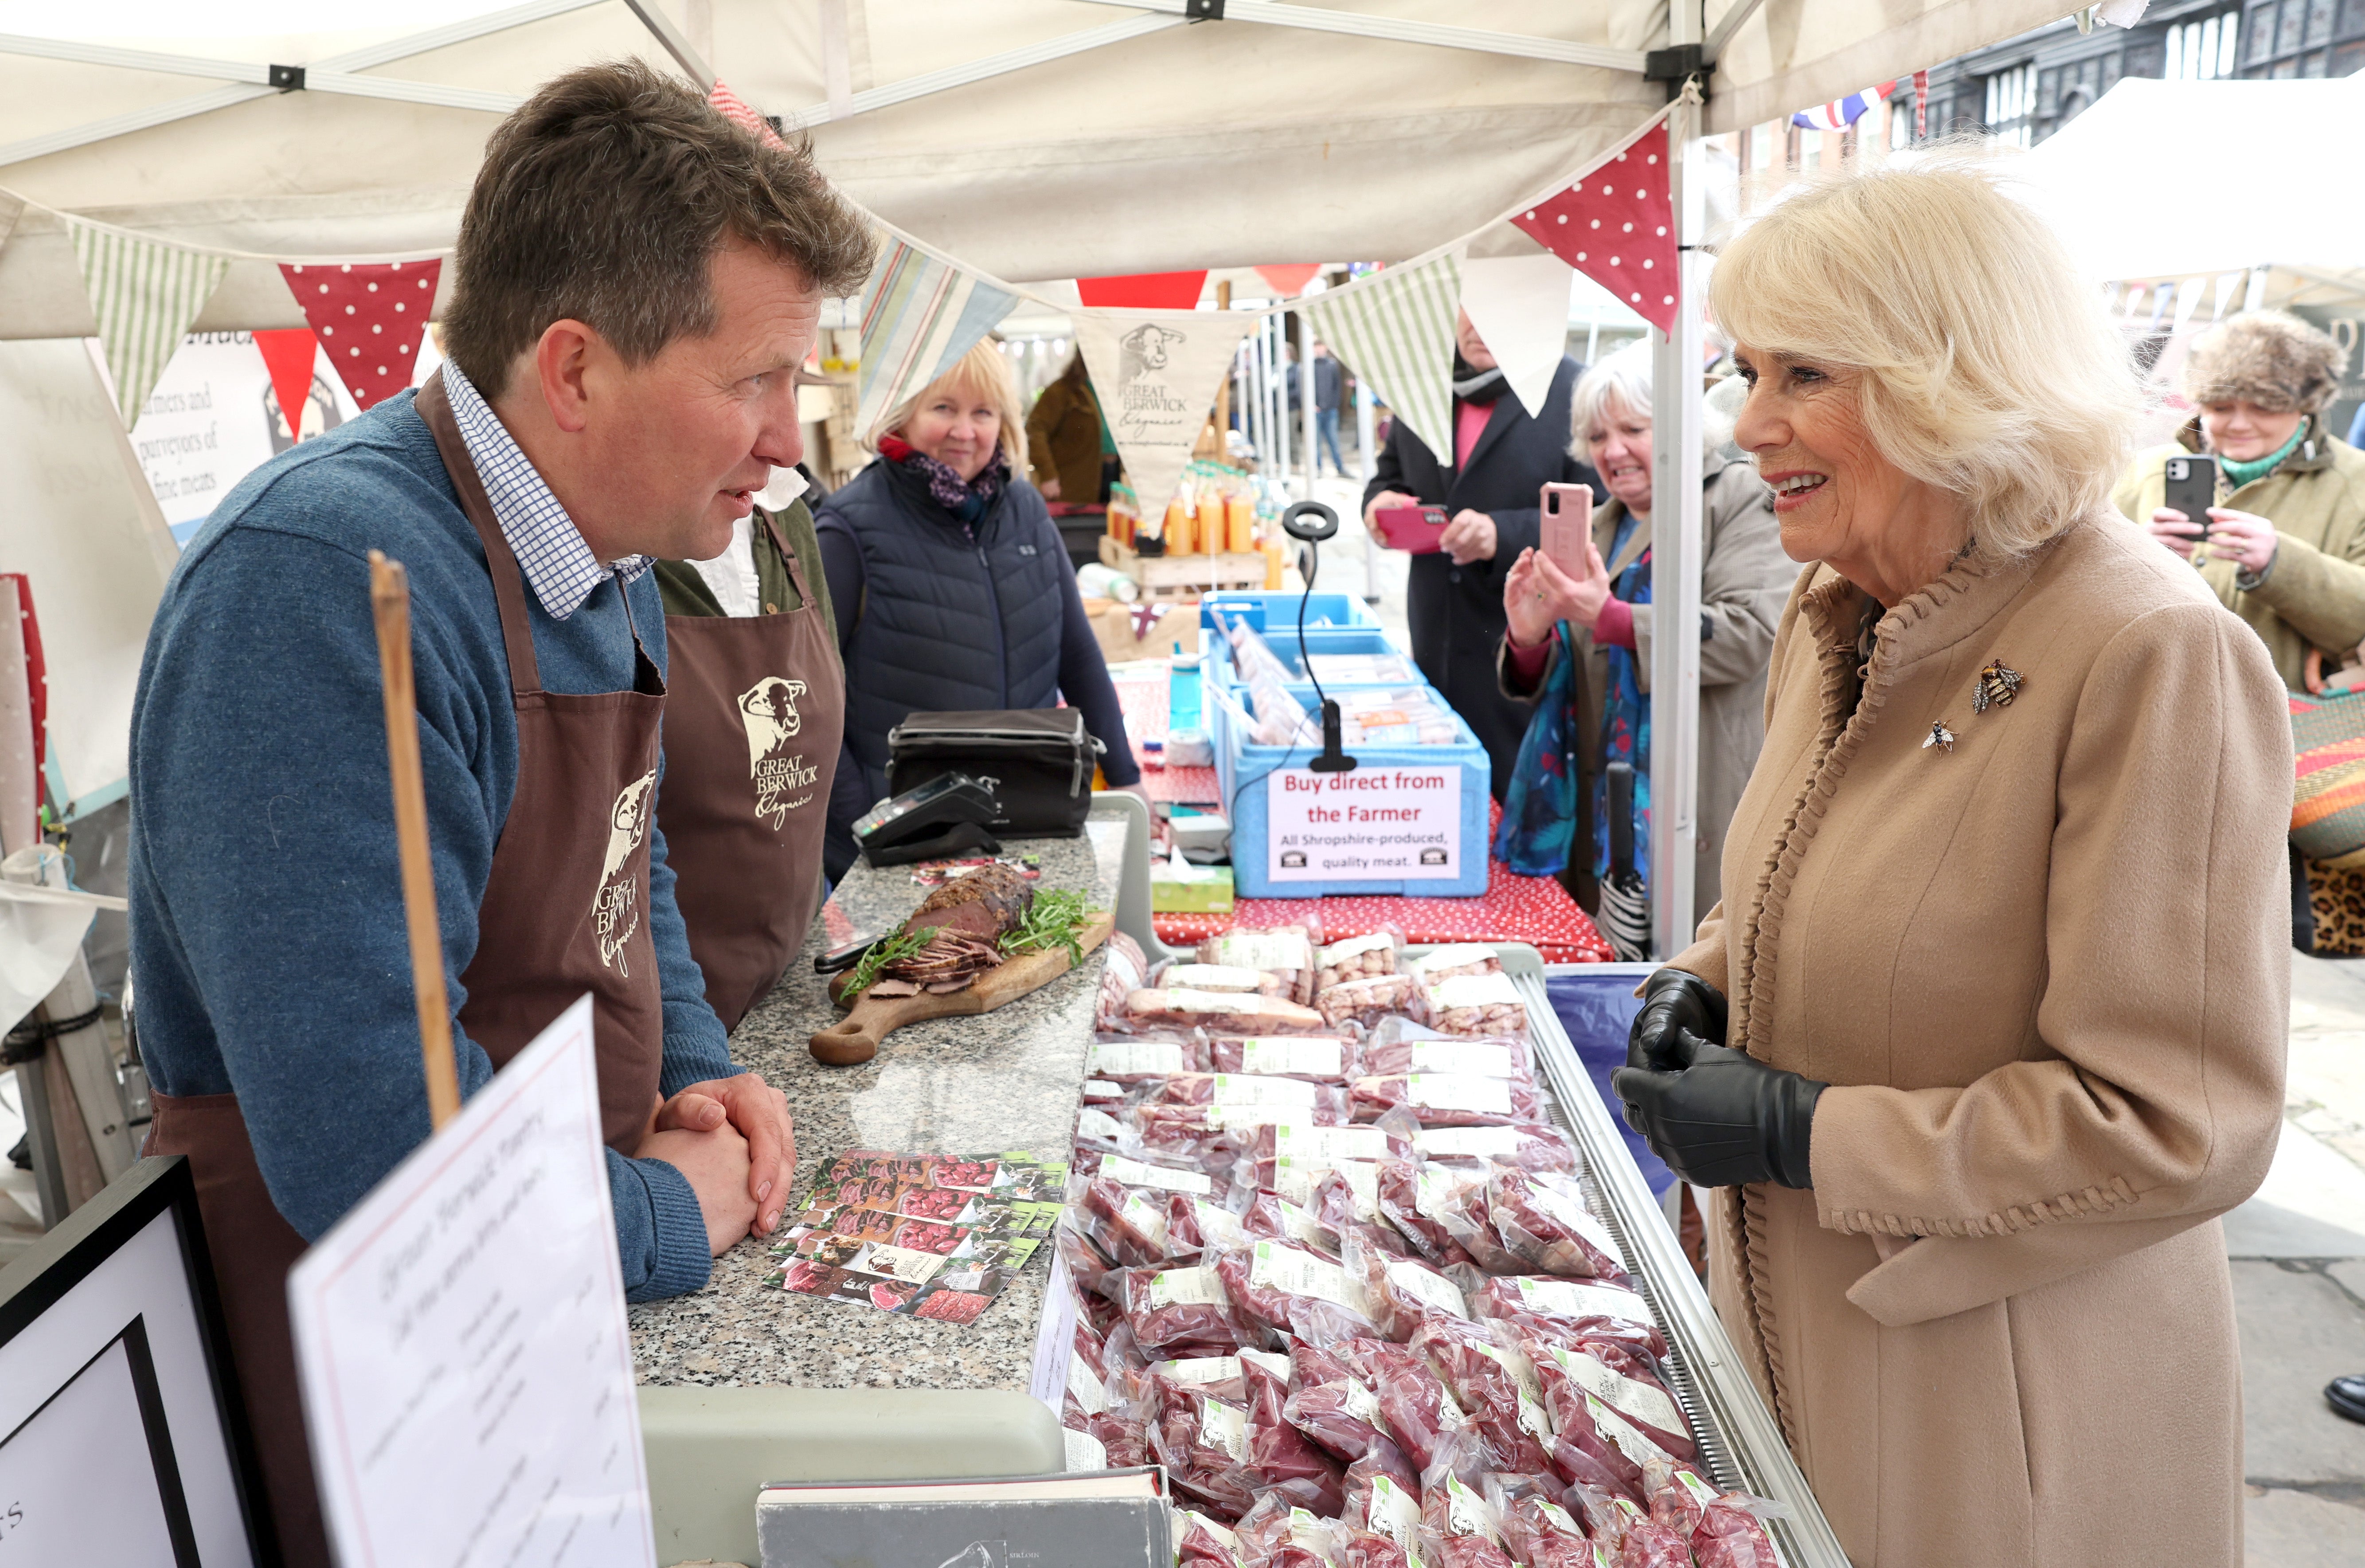 Camilla spent lunchtime touring the local farmer’s market in Shrewsbury